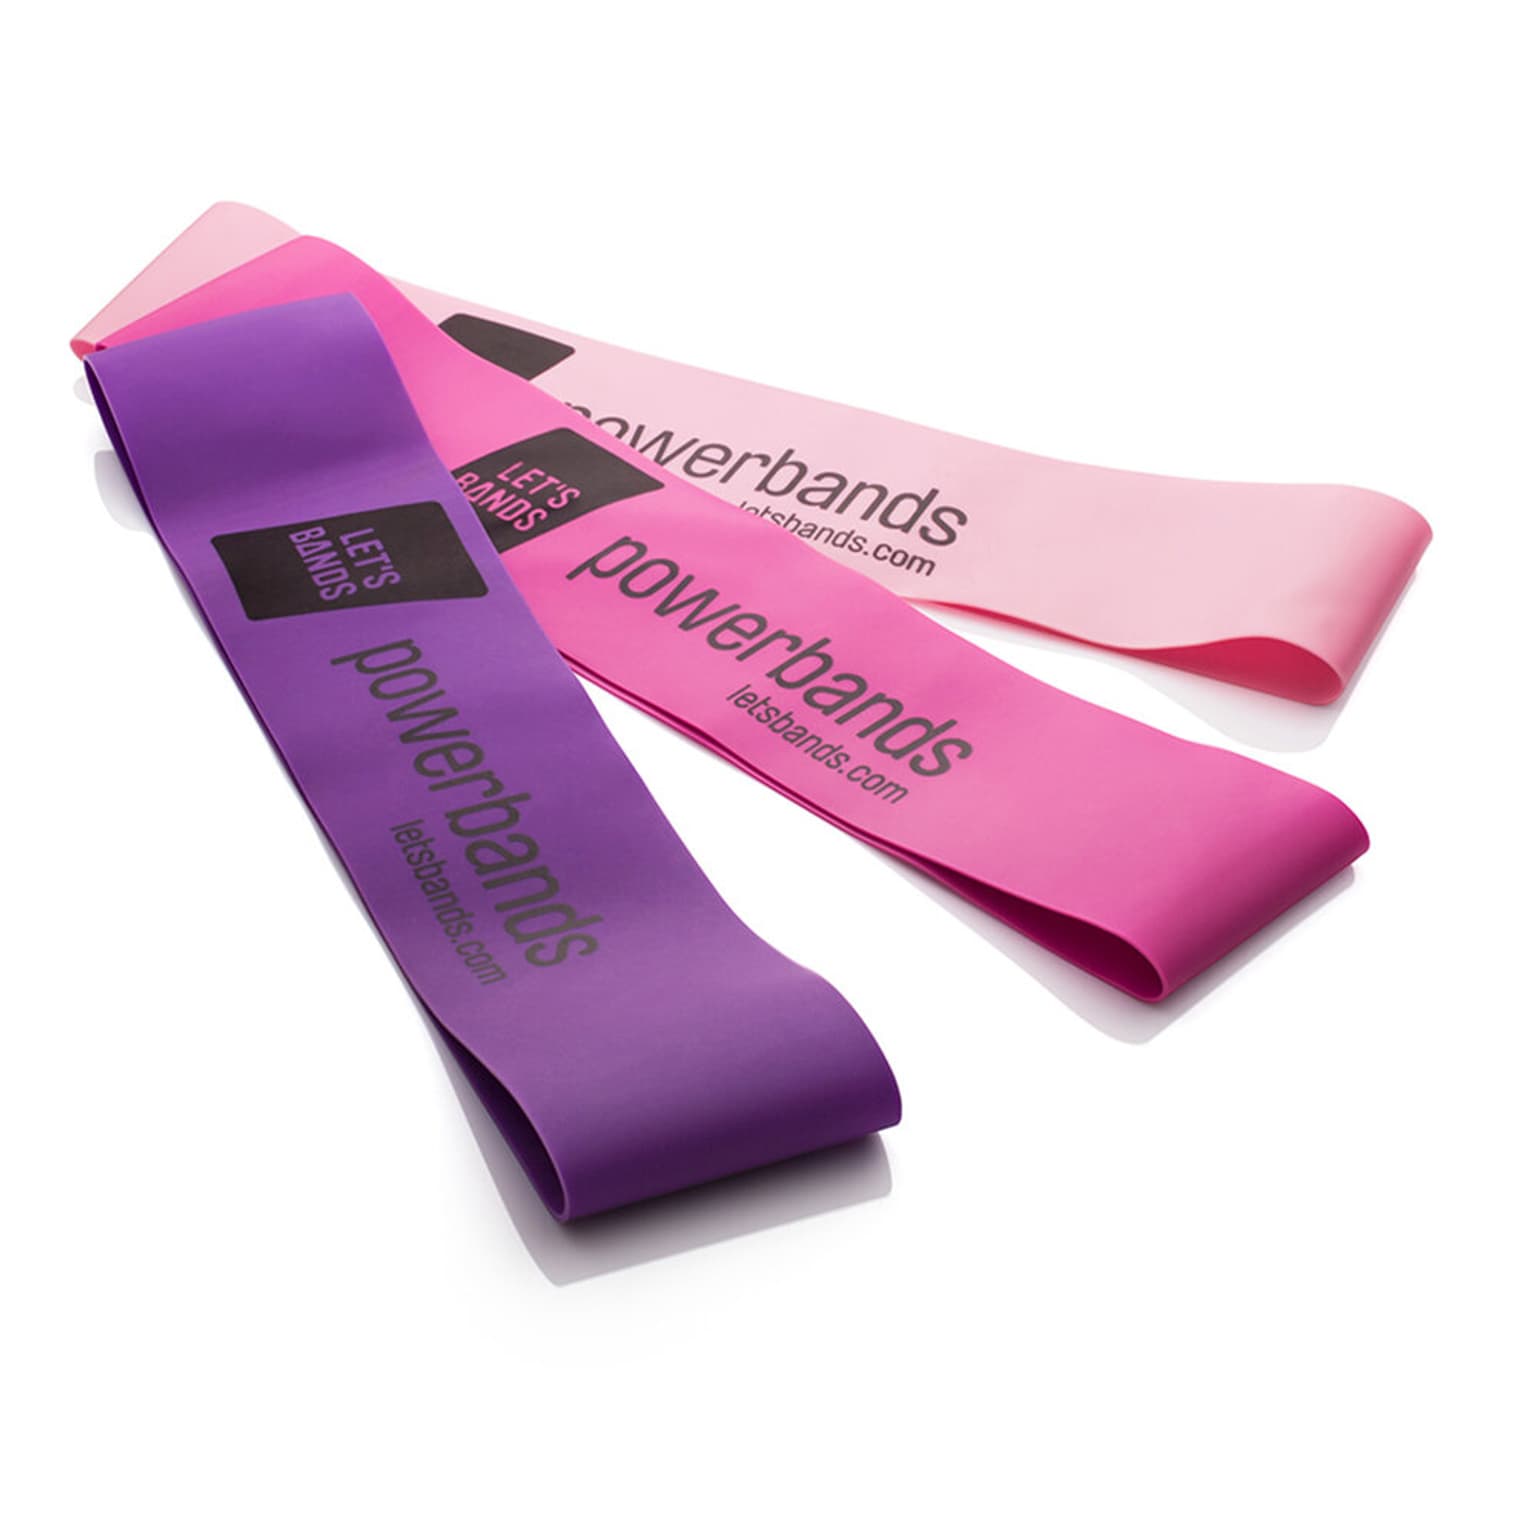 Let's Bands Let's Bands Powerbands Set Lady Elastico fitness 2